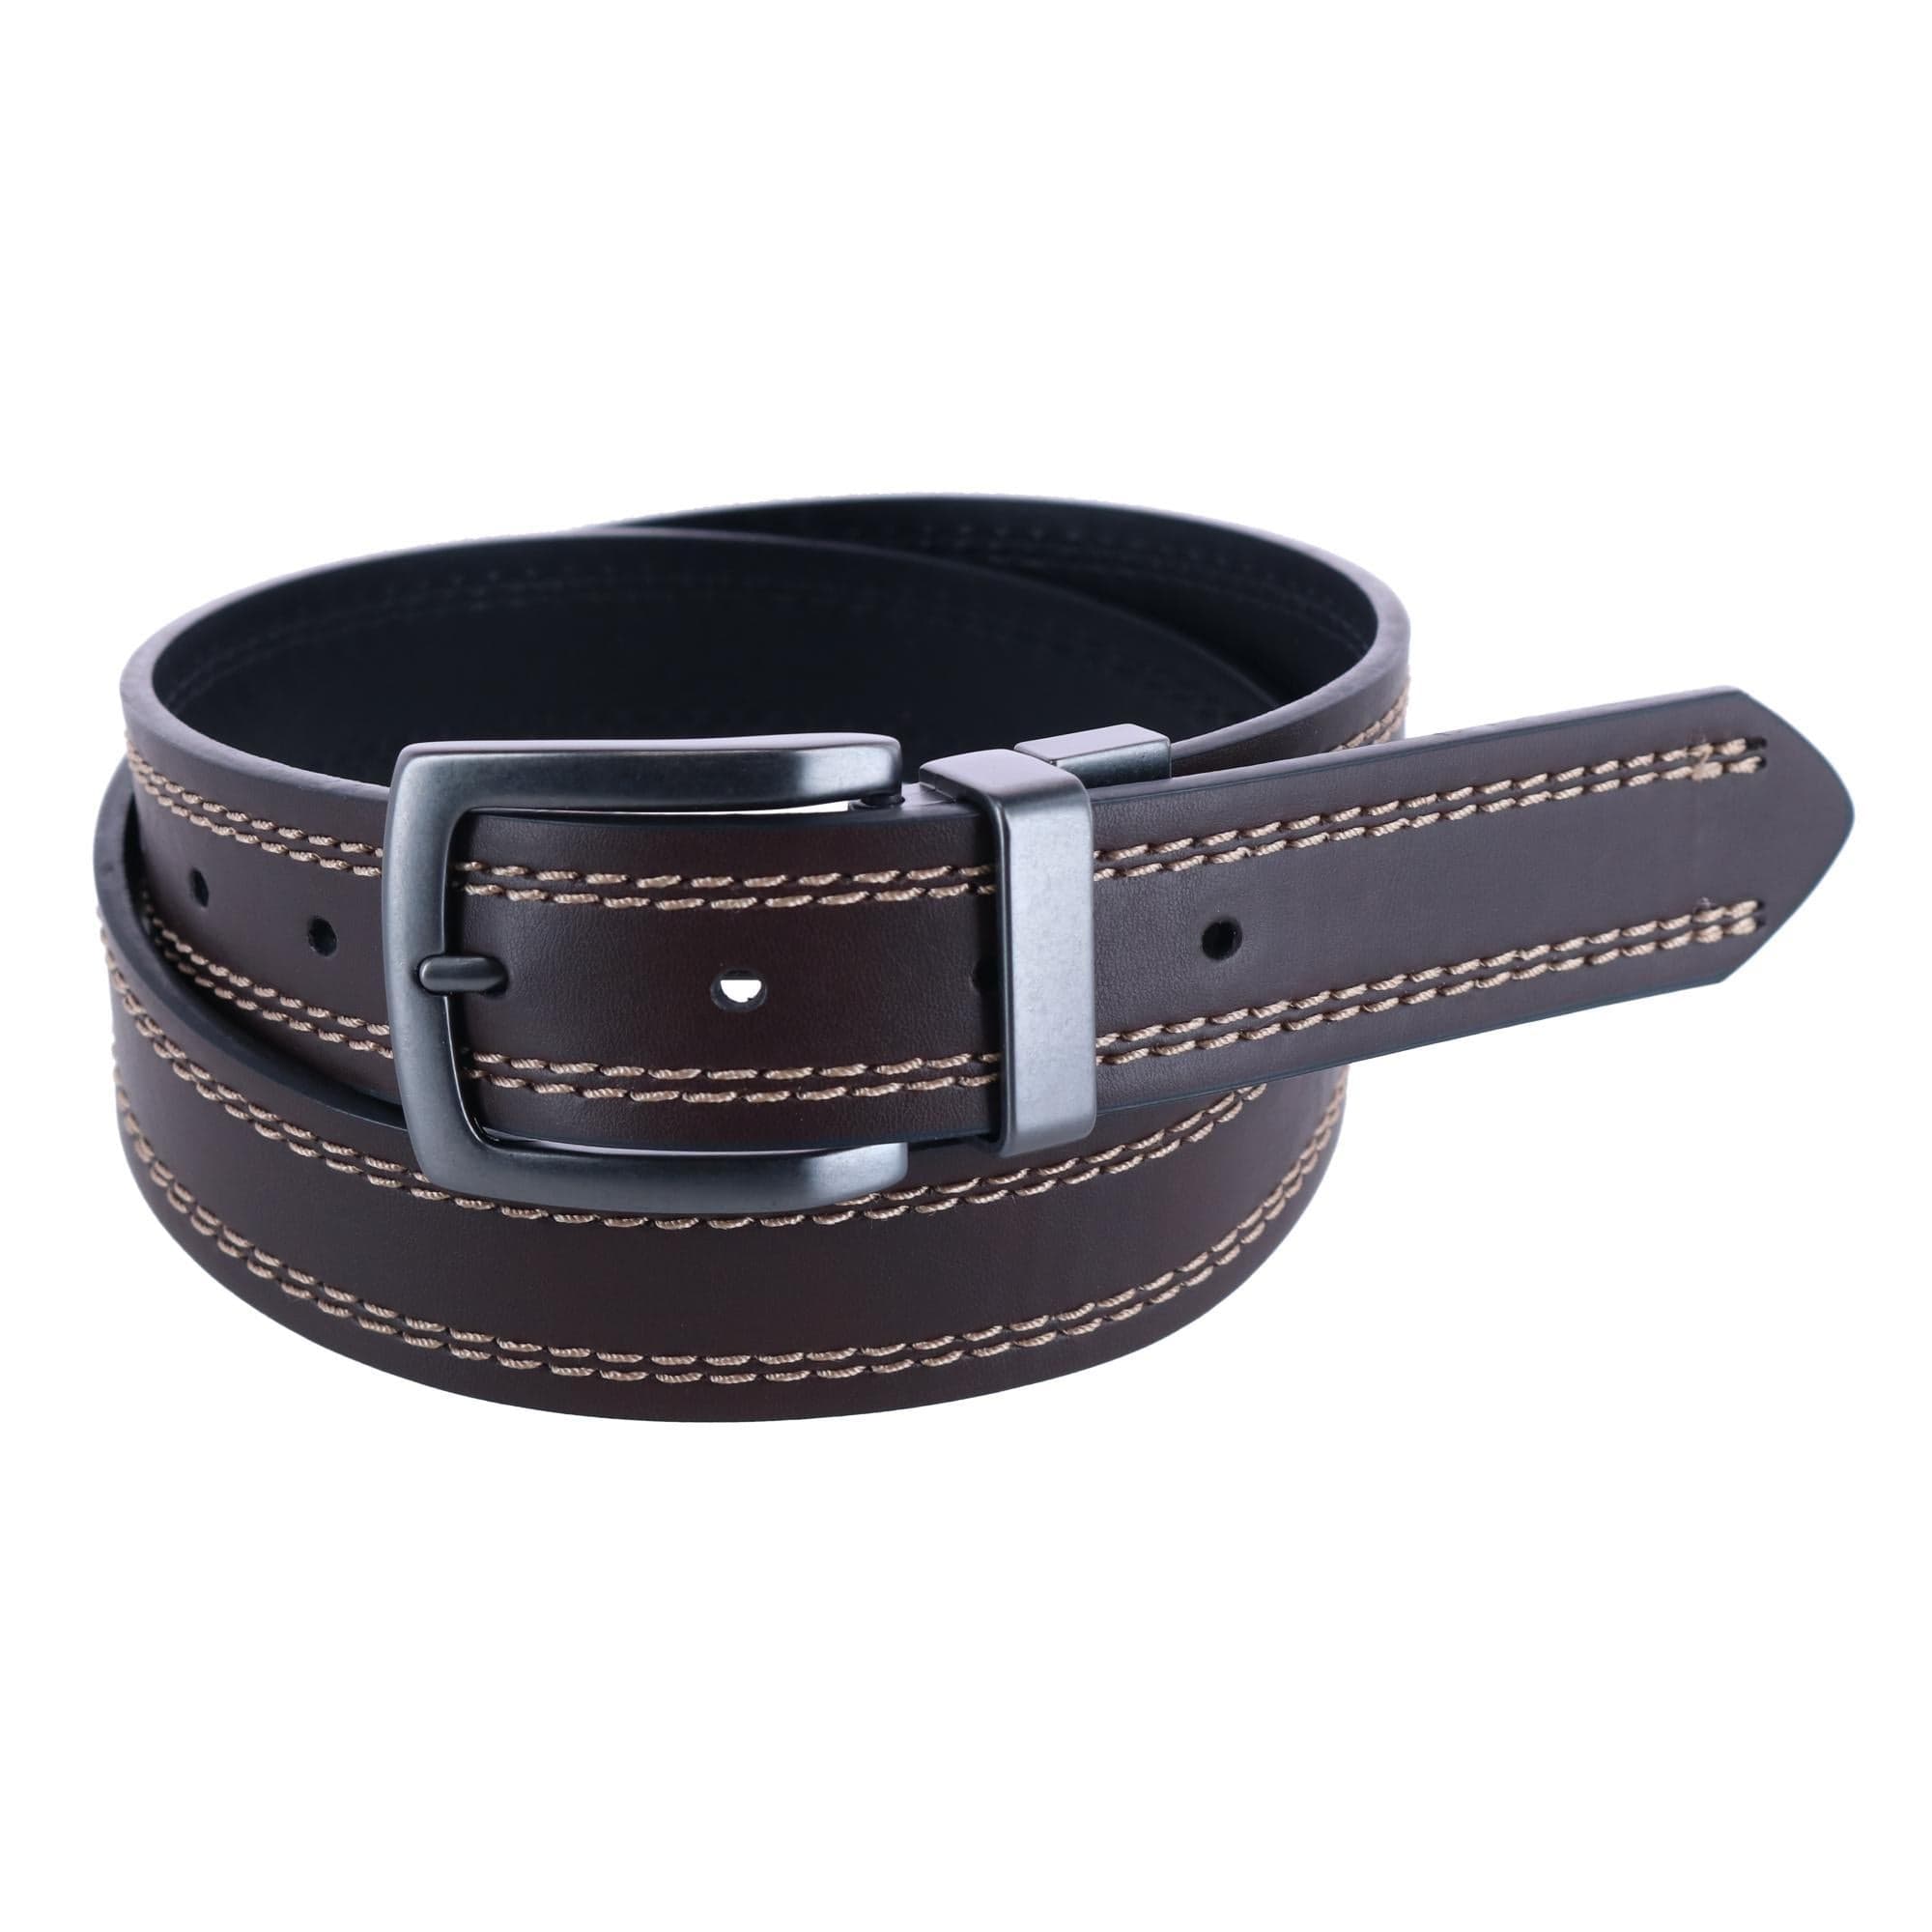 Men's Reversible Belt with Contrast Stitch by Dickies